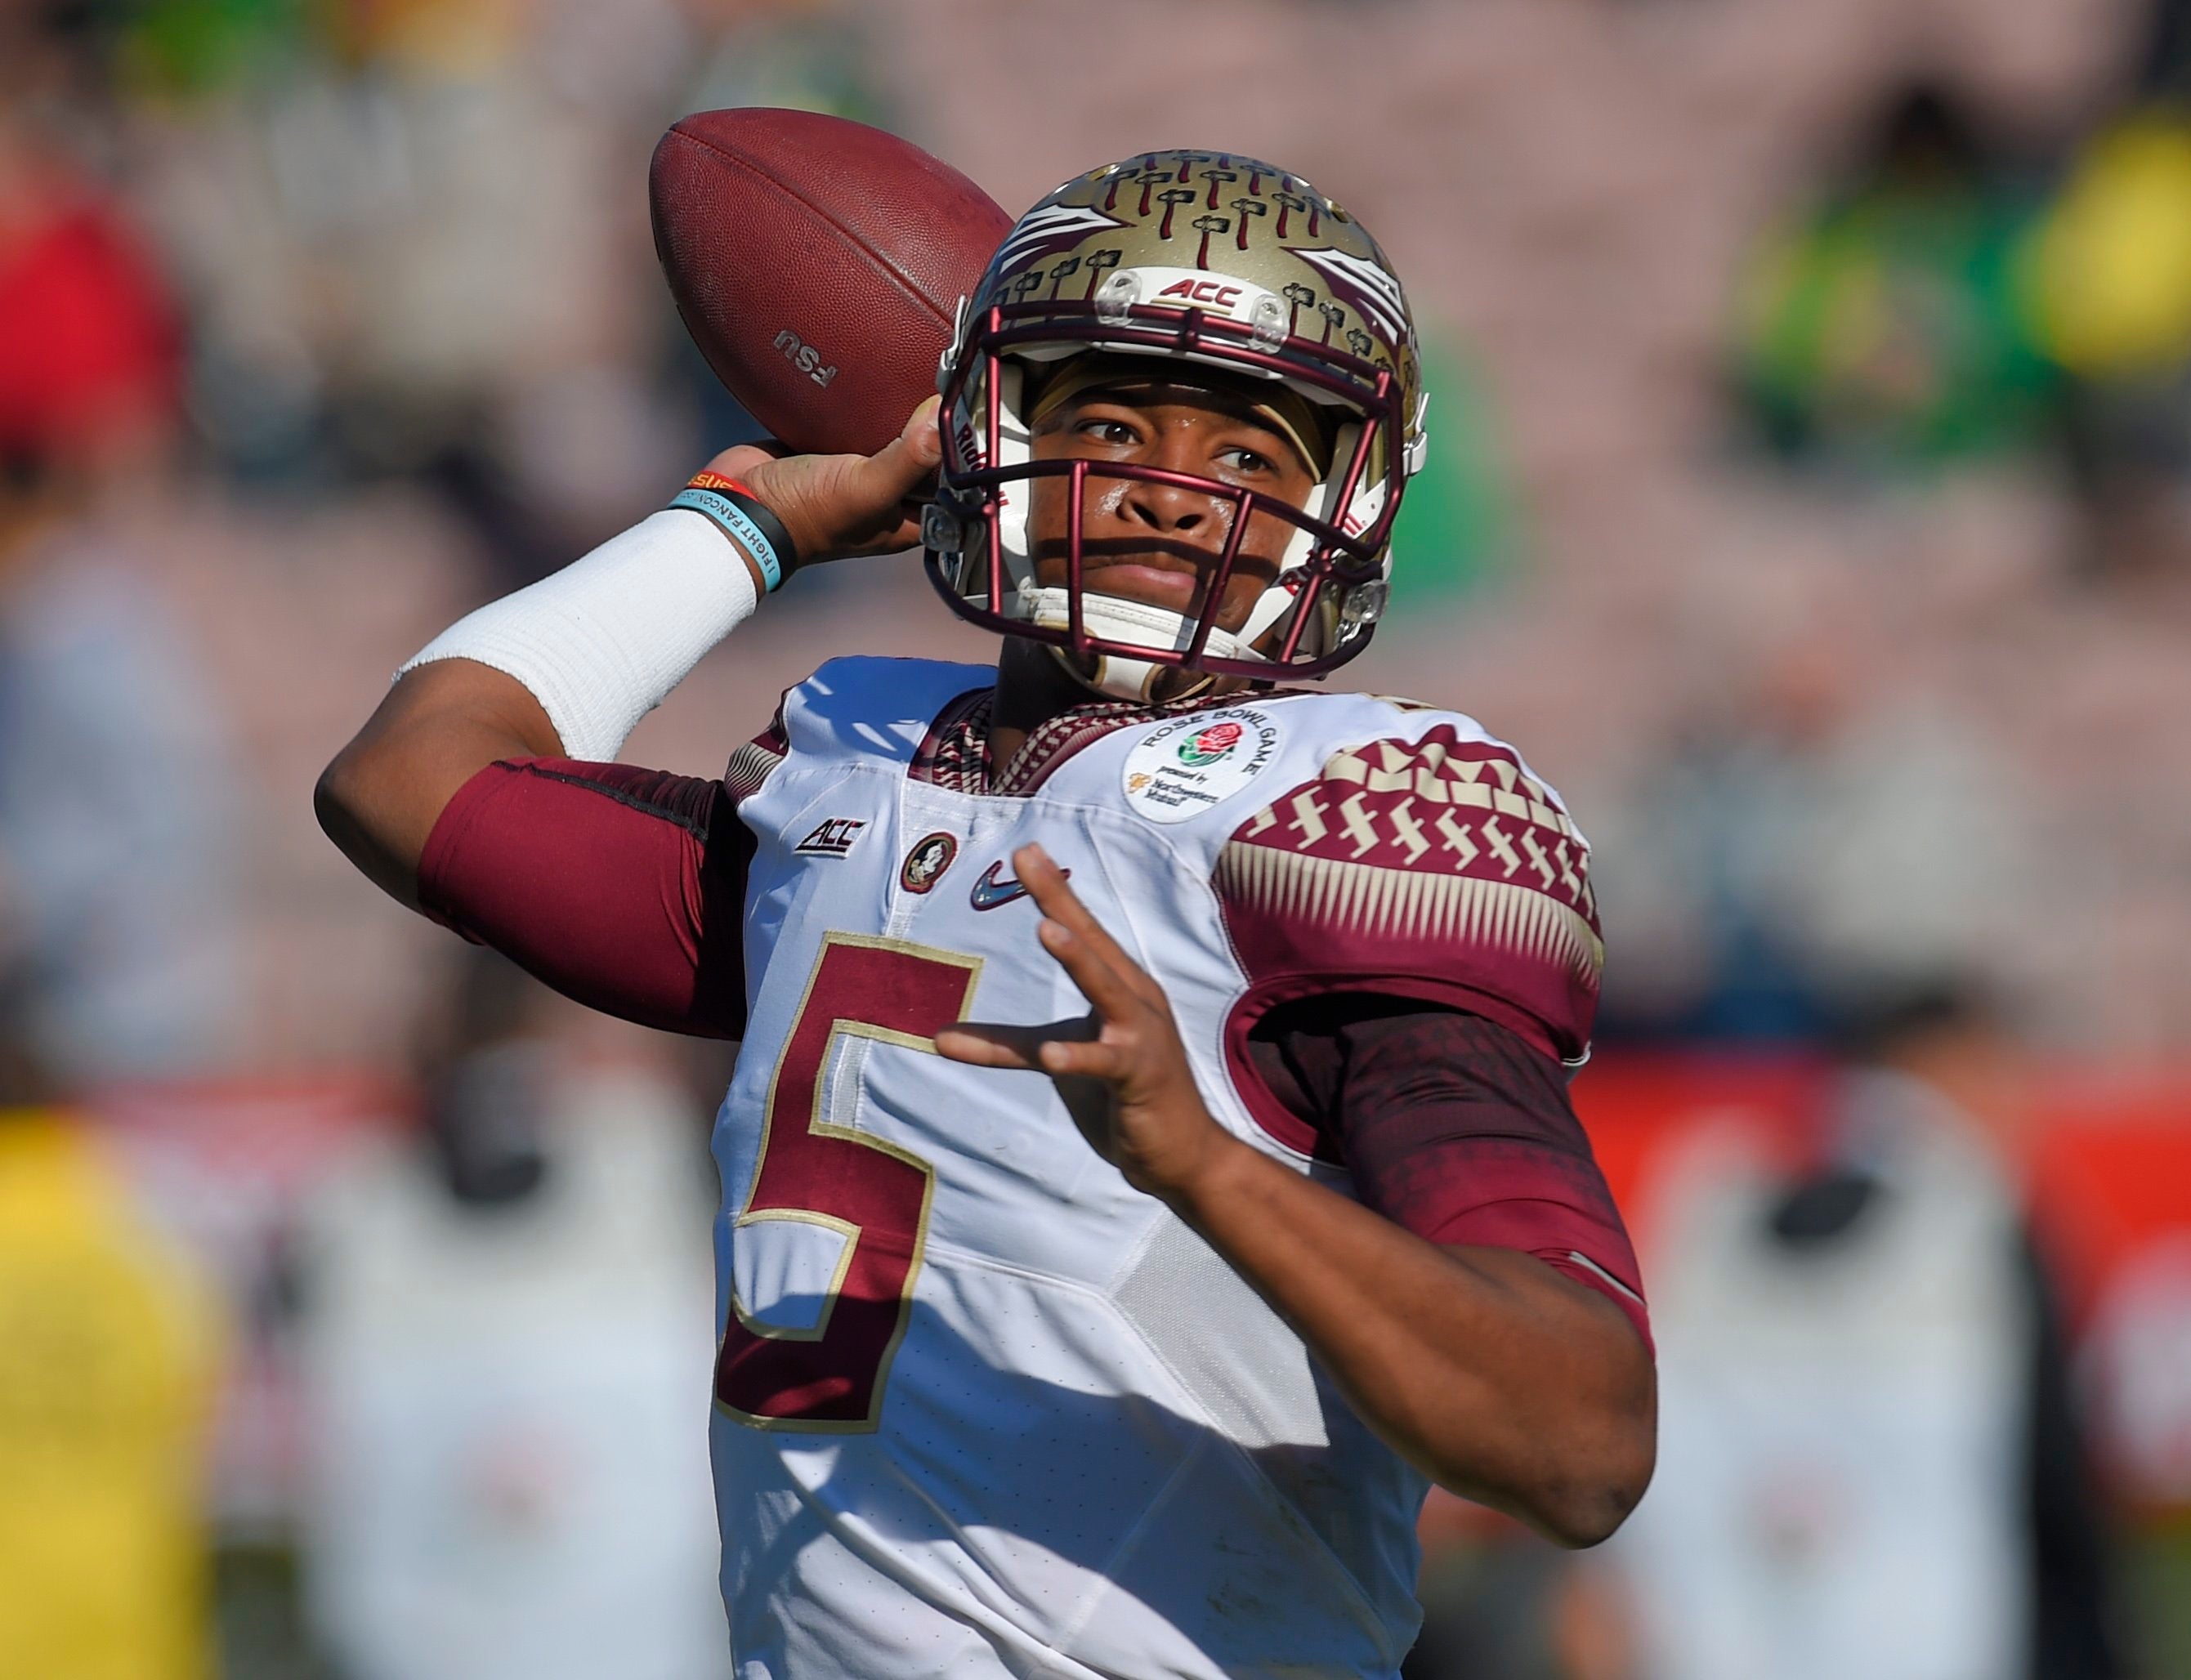 Jameis Winston Told 10-Year-Old Girls That Women Should Be ‘Silent, Polite, Gentle’